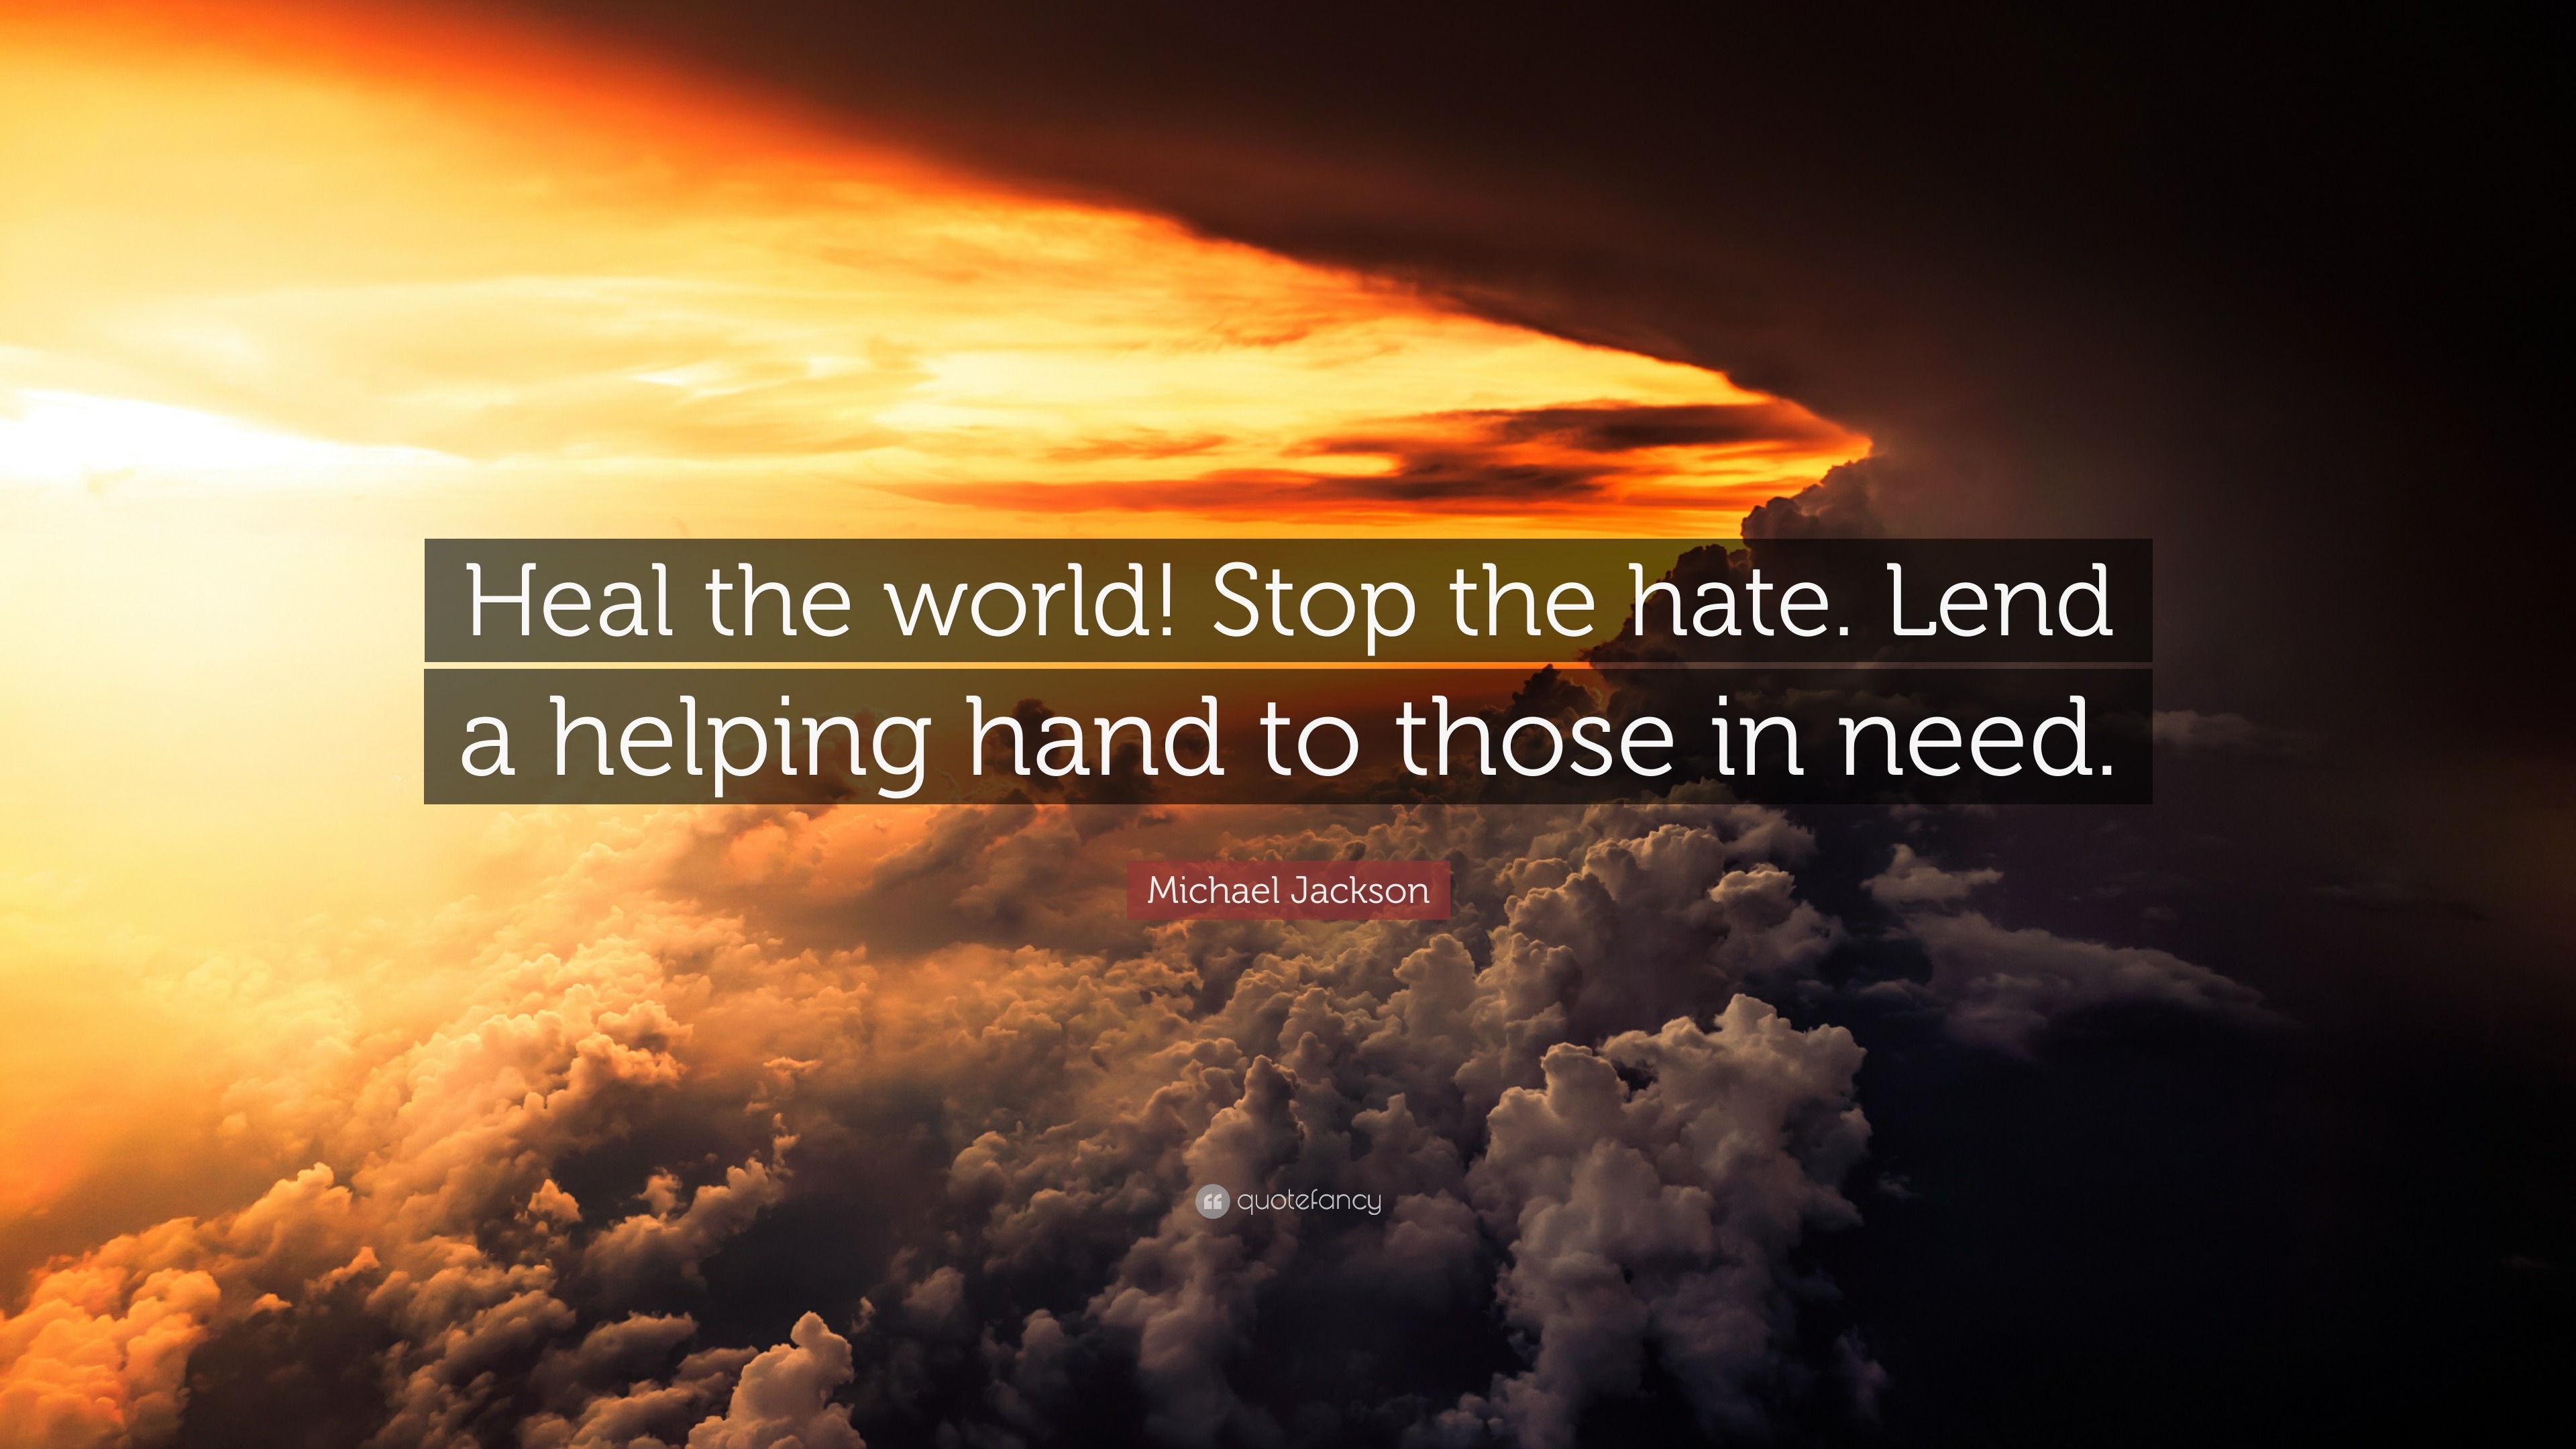 Michael Jackson Quote: “Heal the world! Stop the hate. Lend a helping ...
